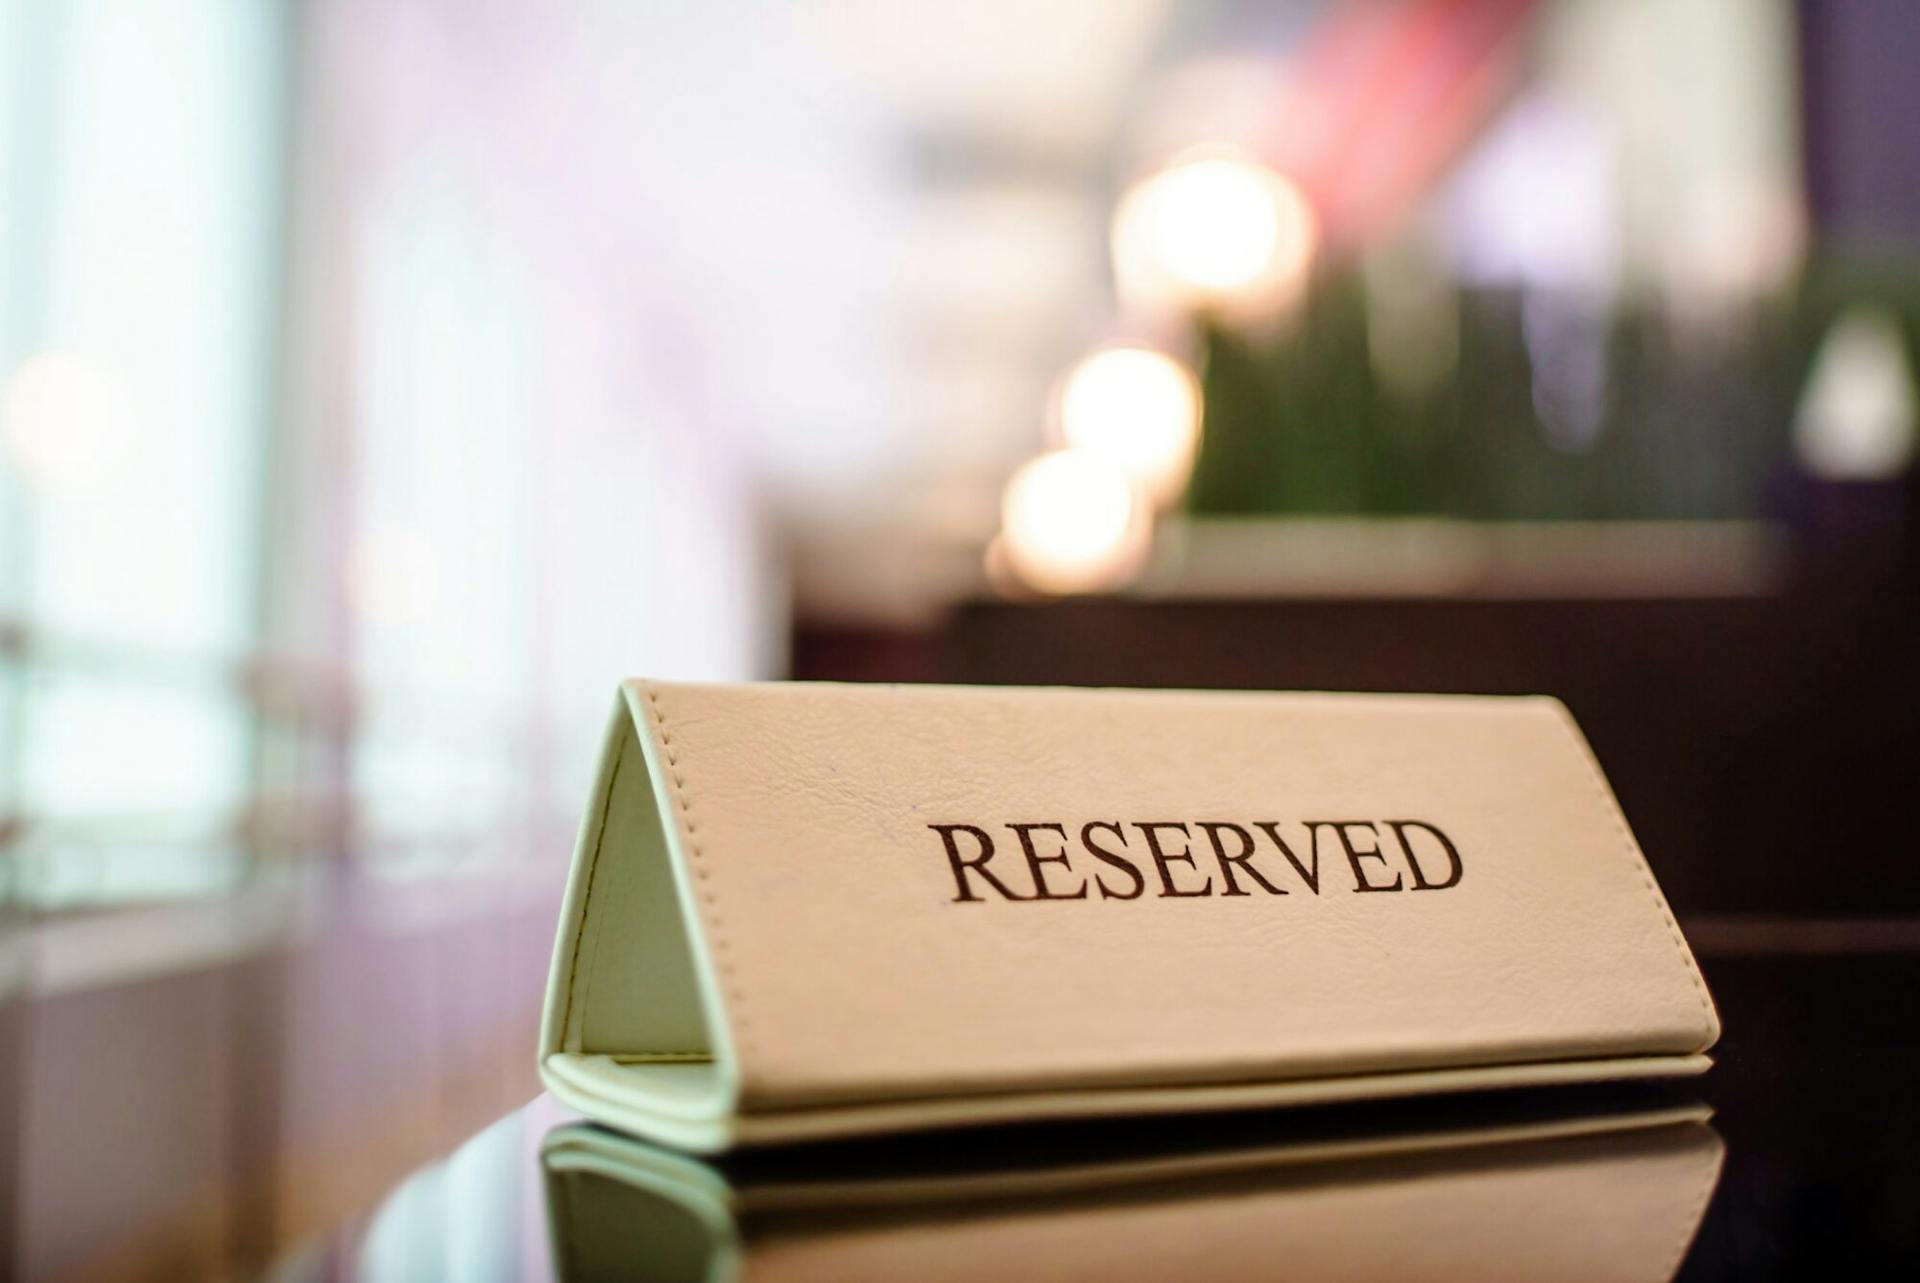 Should Your Restaurant Require Reservation Deposits?